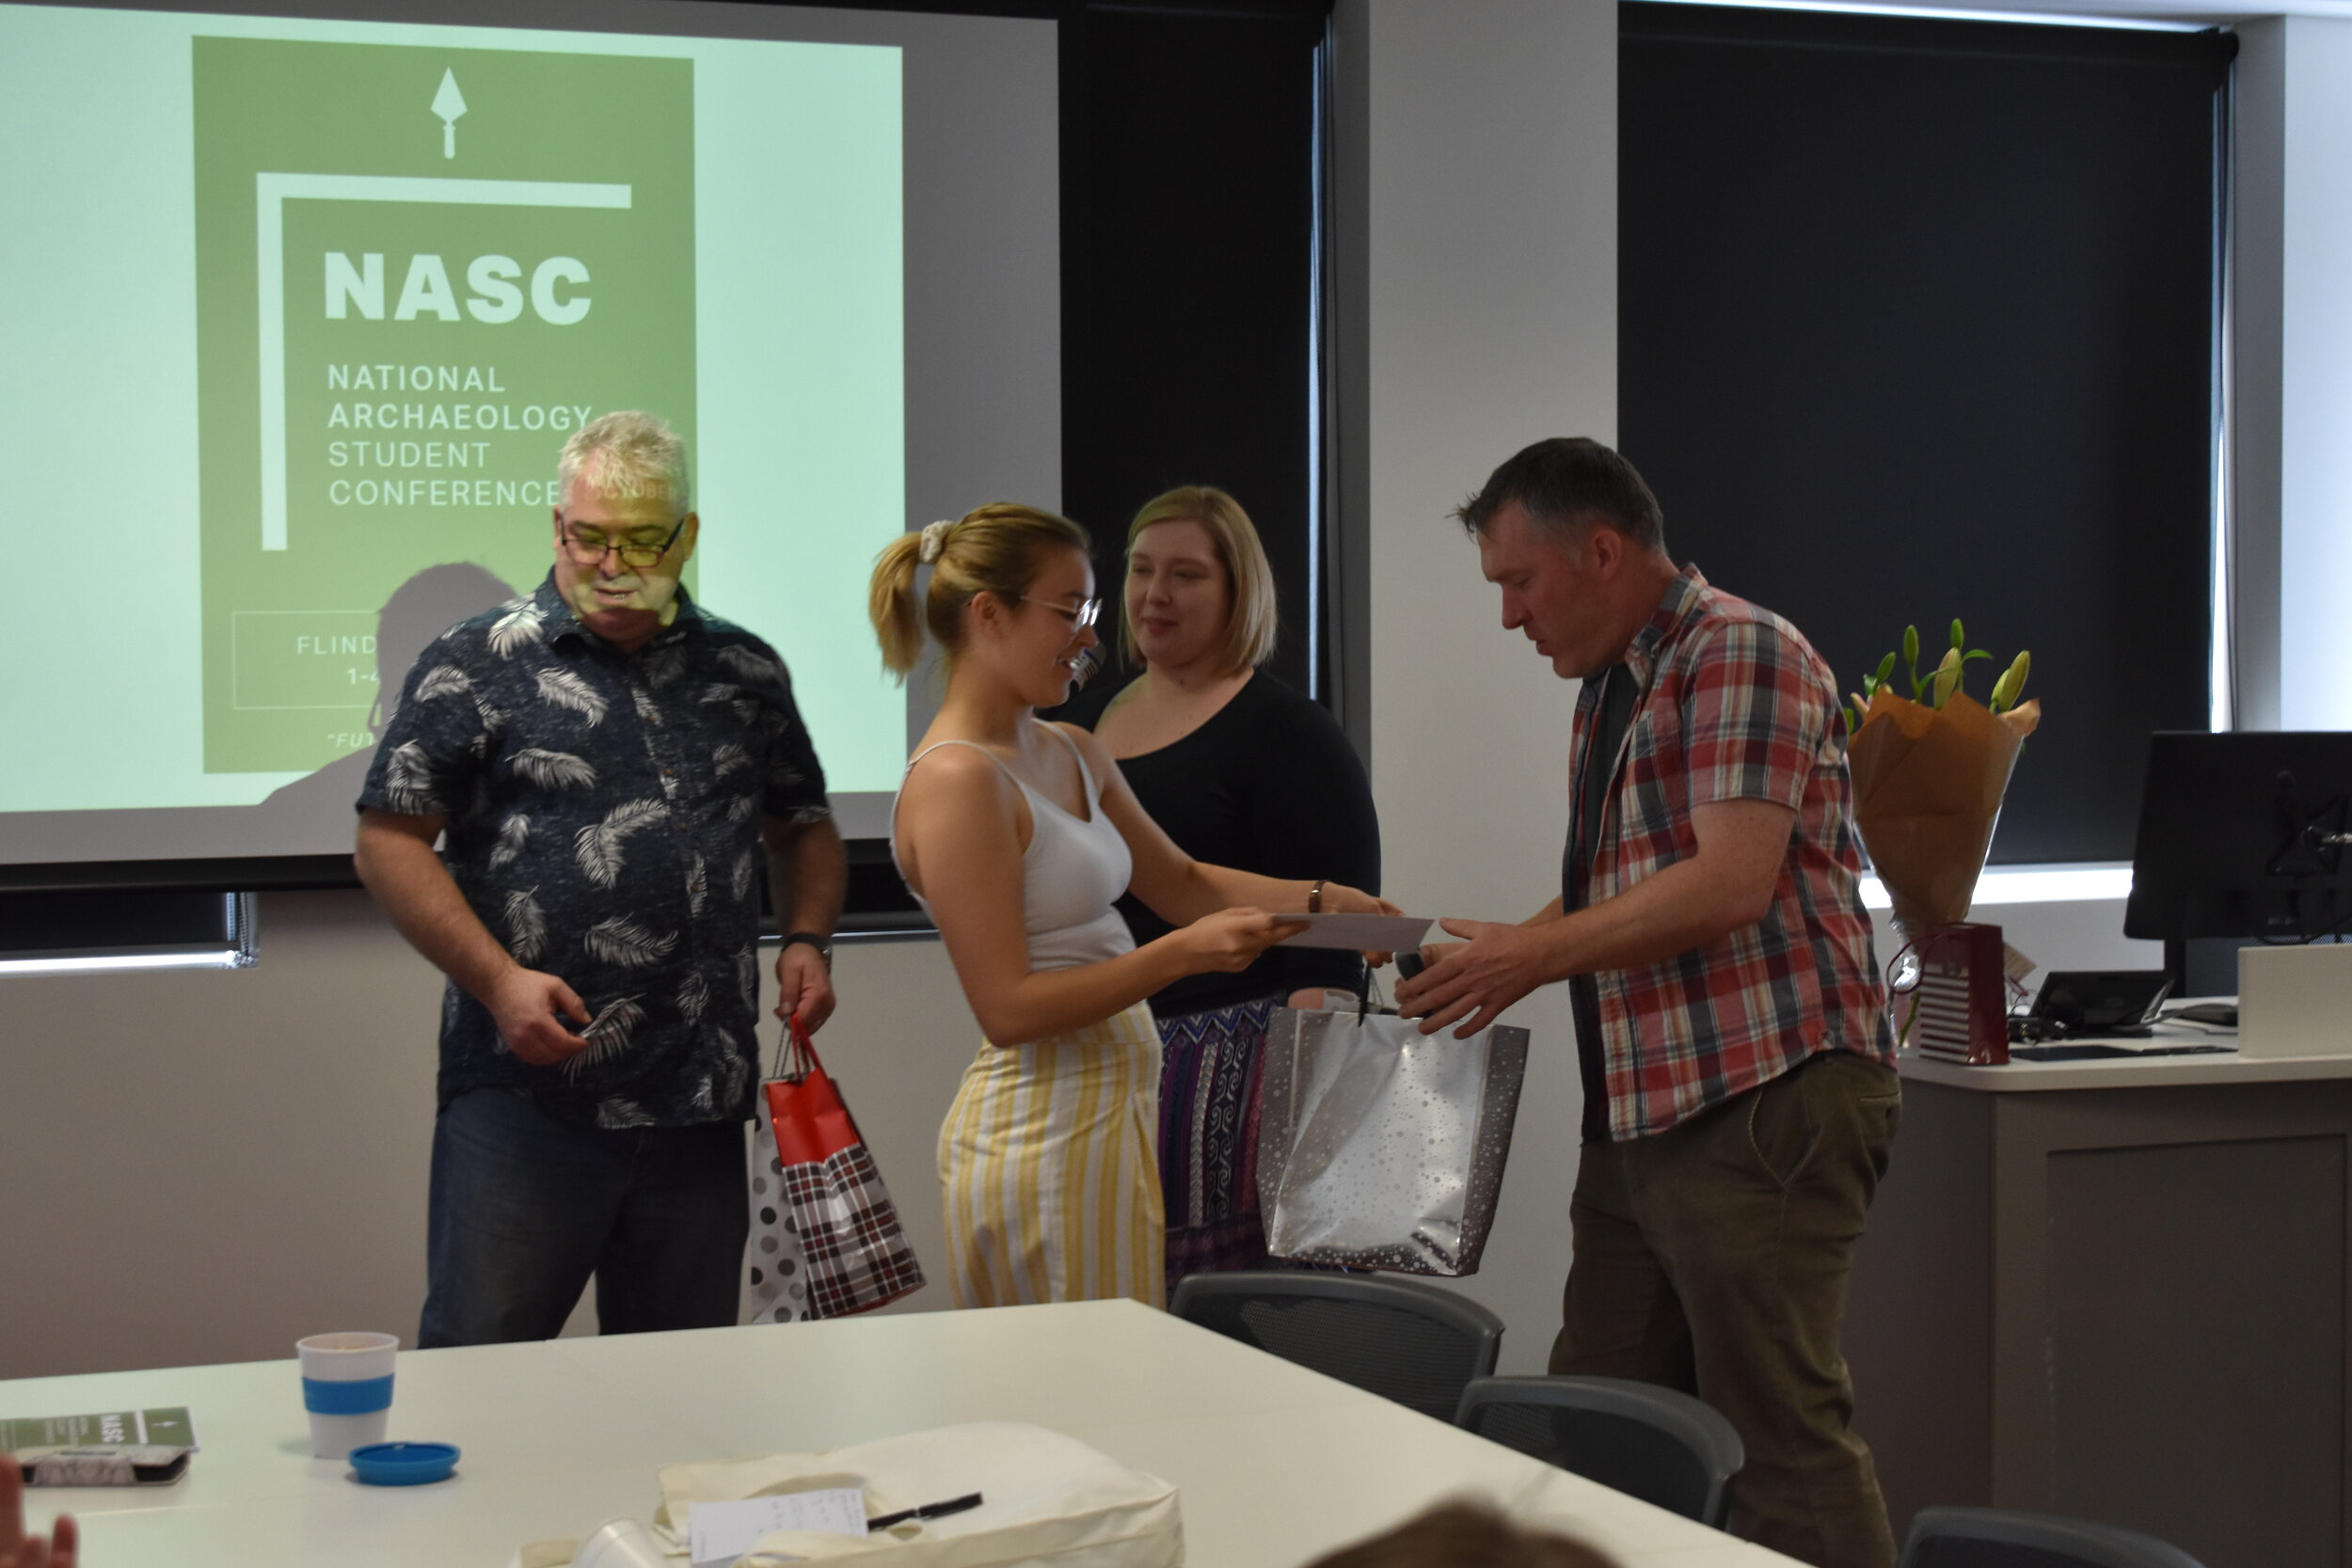 Richard Osgood receiving a thank you gift from Maeghan Stace, NASC Secretary